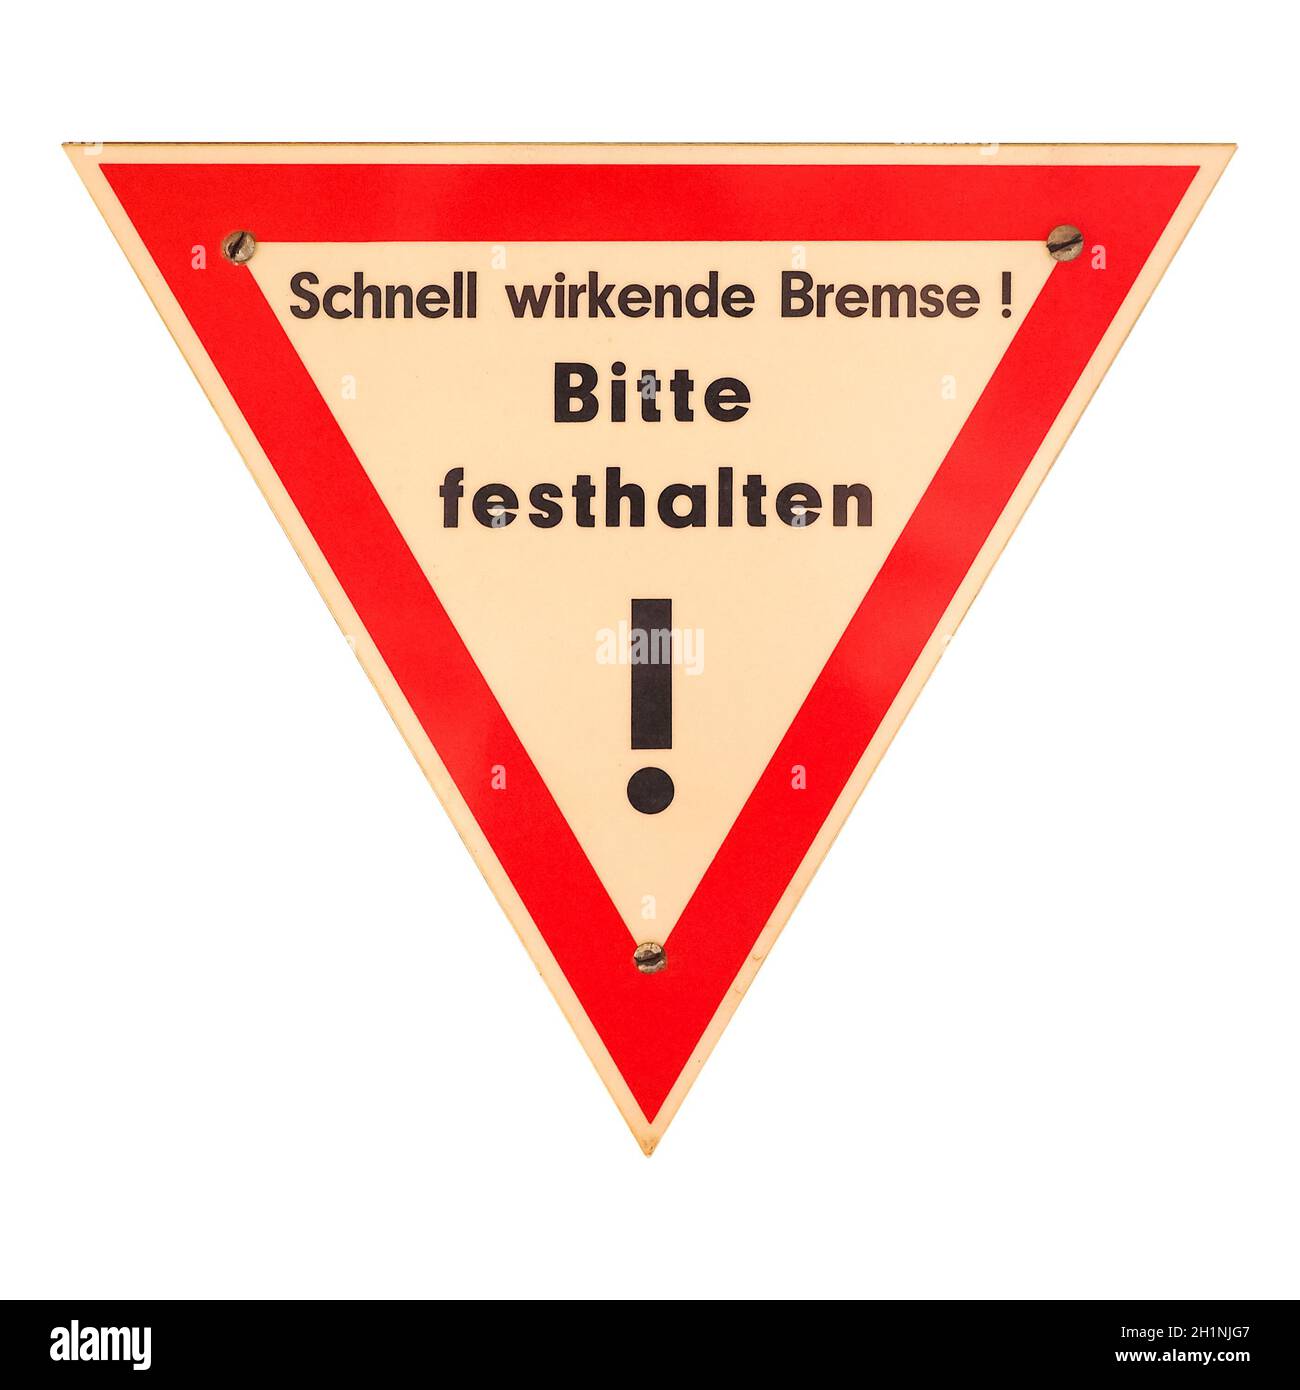 German traffic sign isolated over white background. Schnell wirkende Bremse, bitte festhalten (translation: Fast acting brake, please hold on) Stock Photo